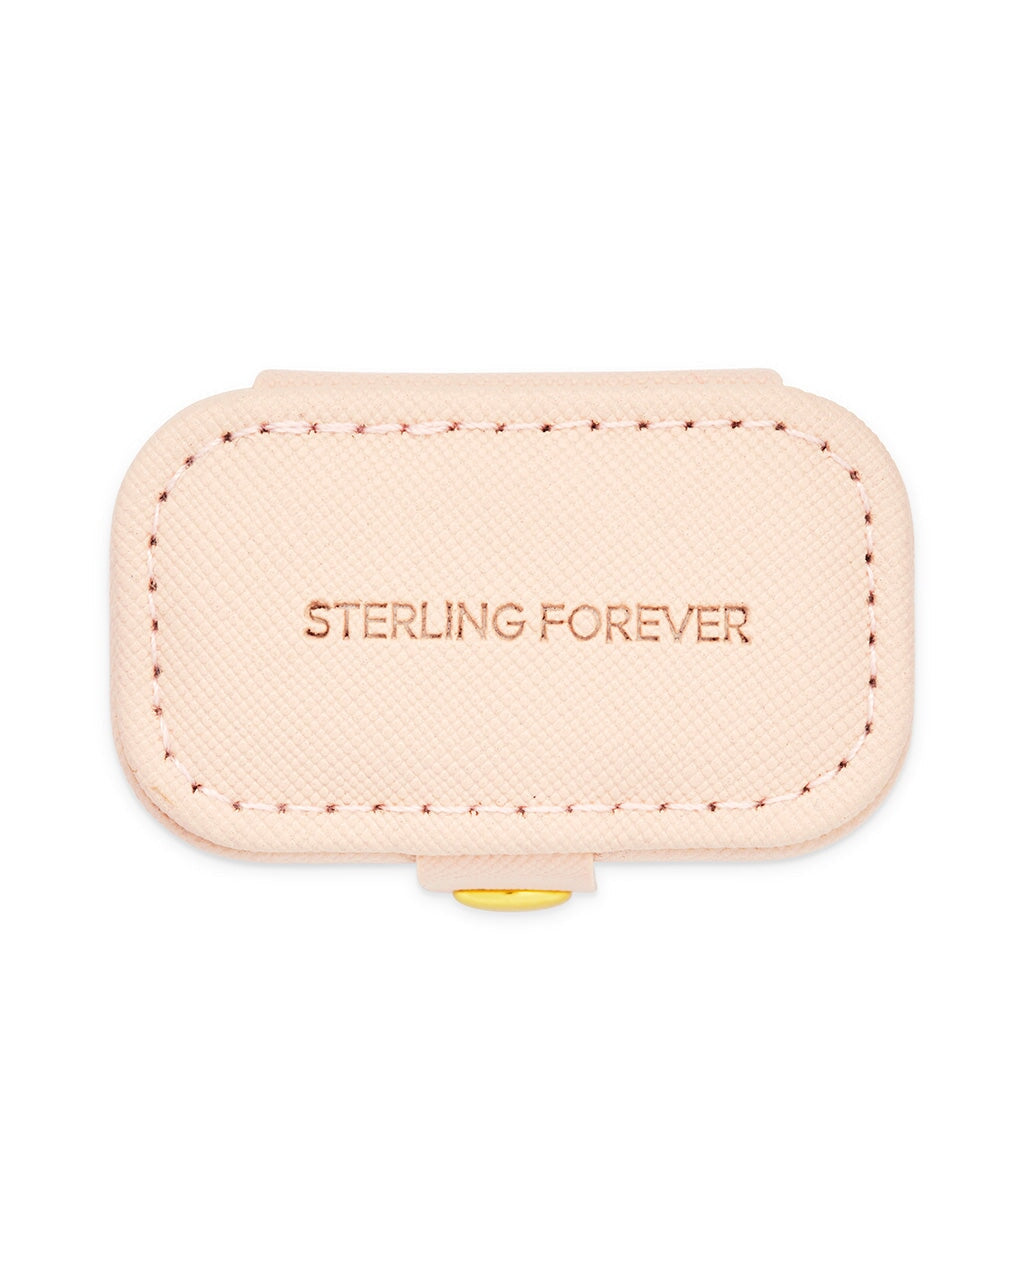 Travel Ring Case Jewelry Case Sterling Forever 